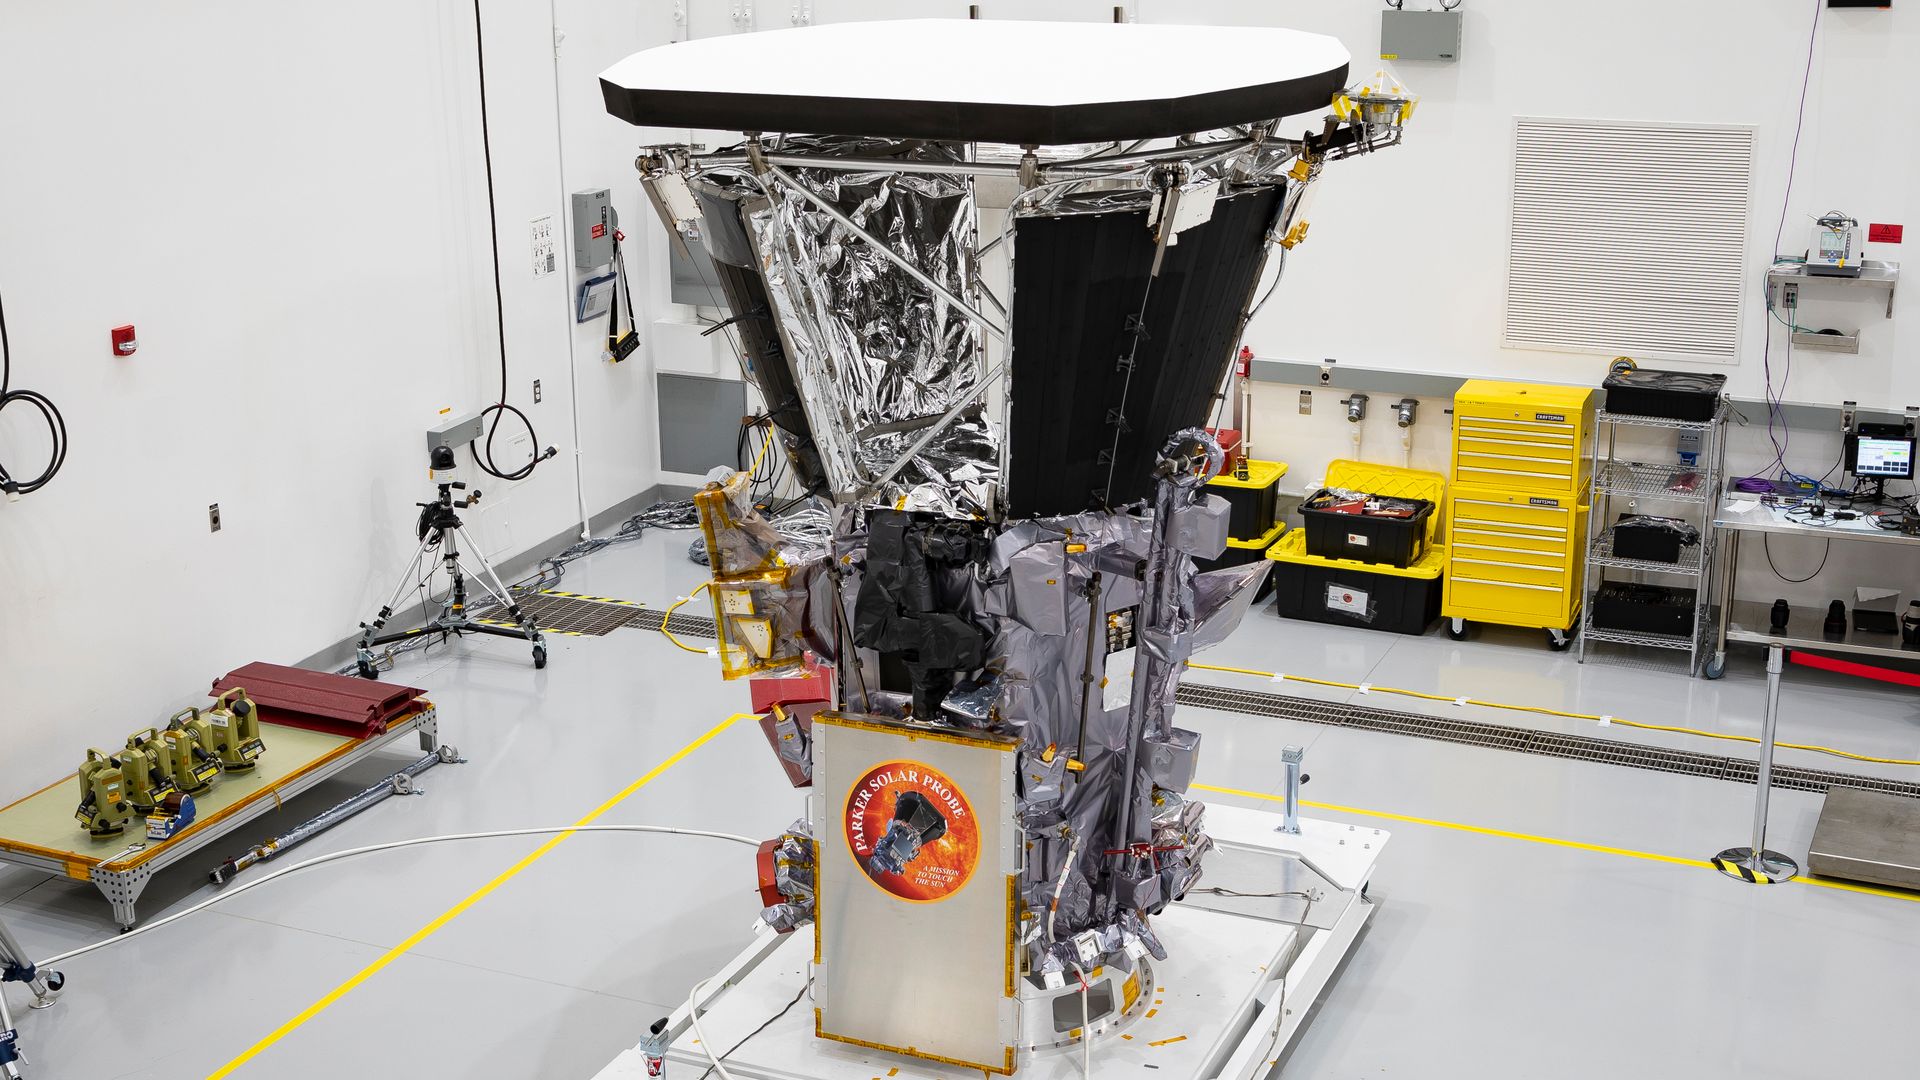  Parker Solar Probe sits in a clean room on July 6, 2018, at Astrotech Space Operations in Titusville, Florida, after the installation of its heat shield.